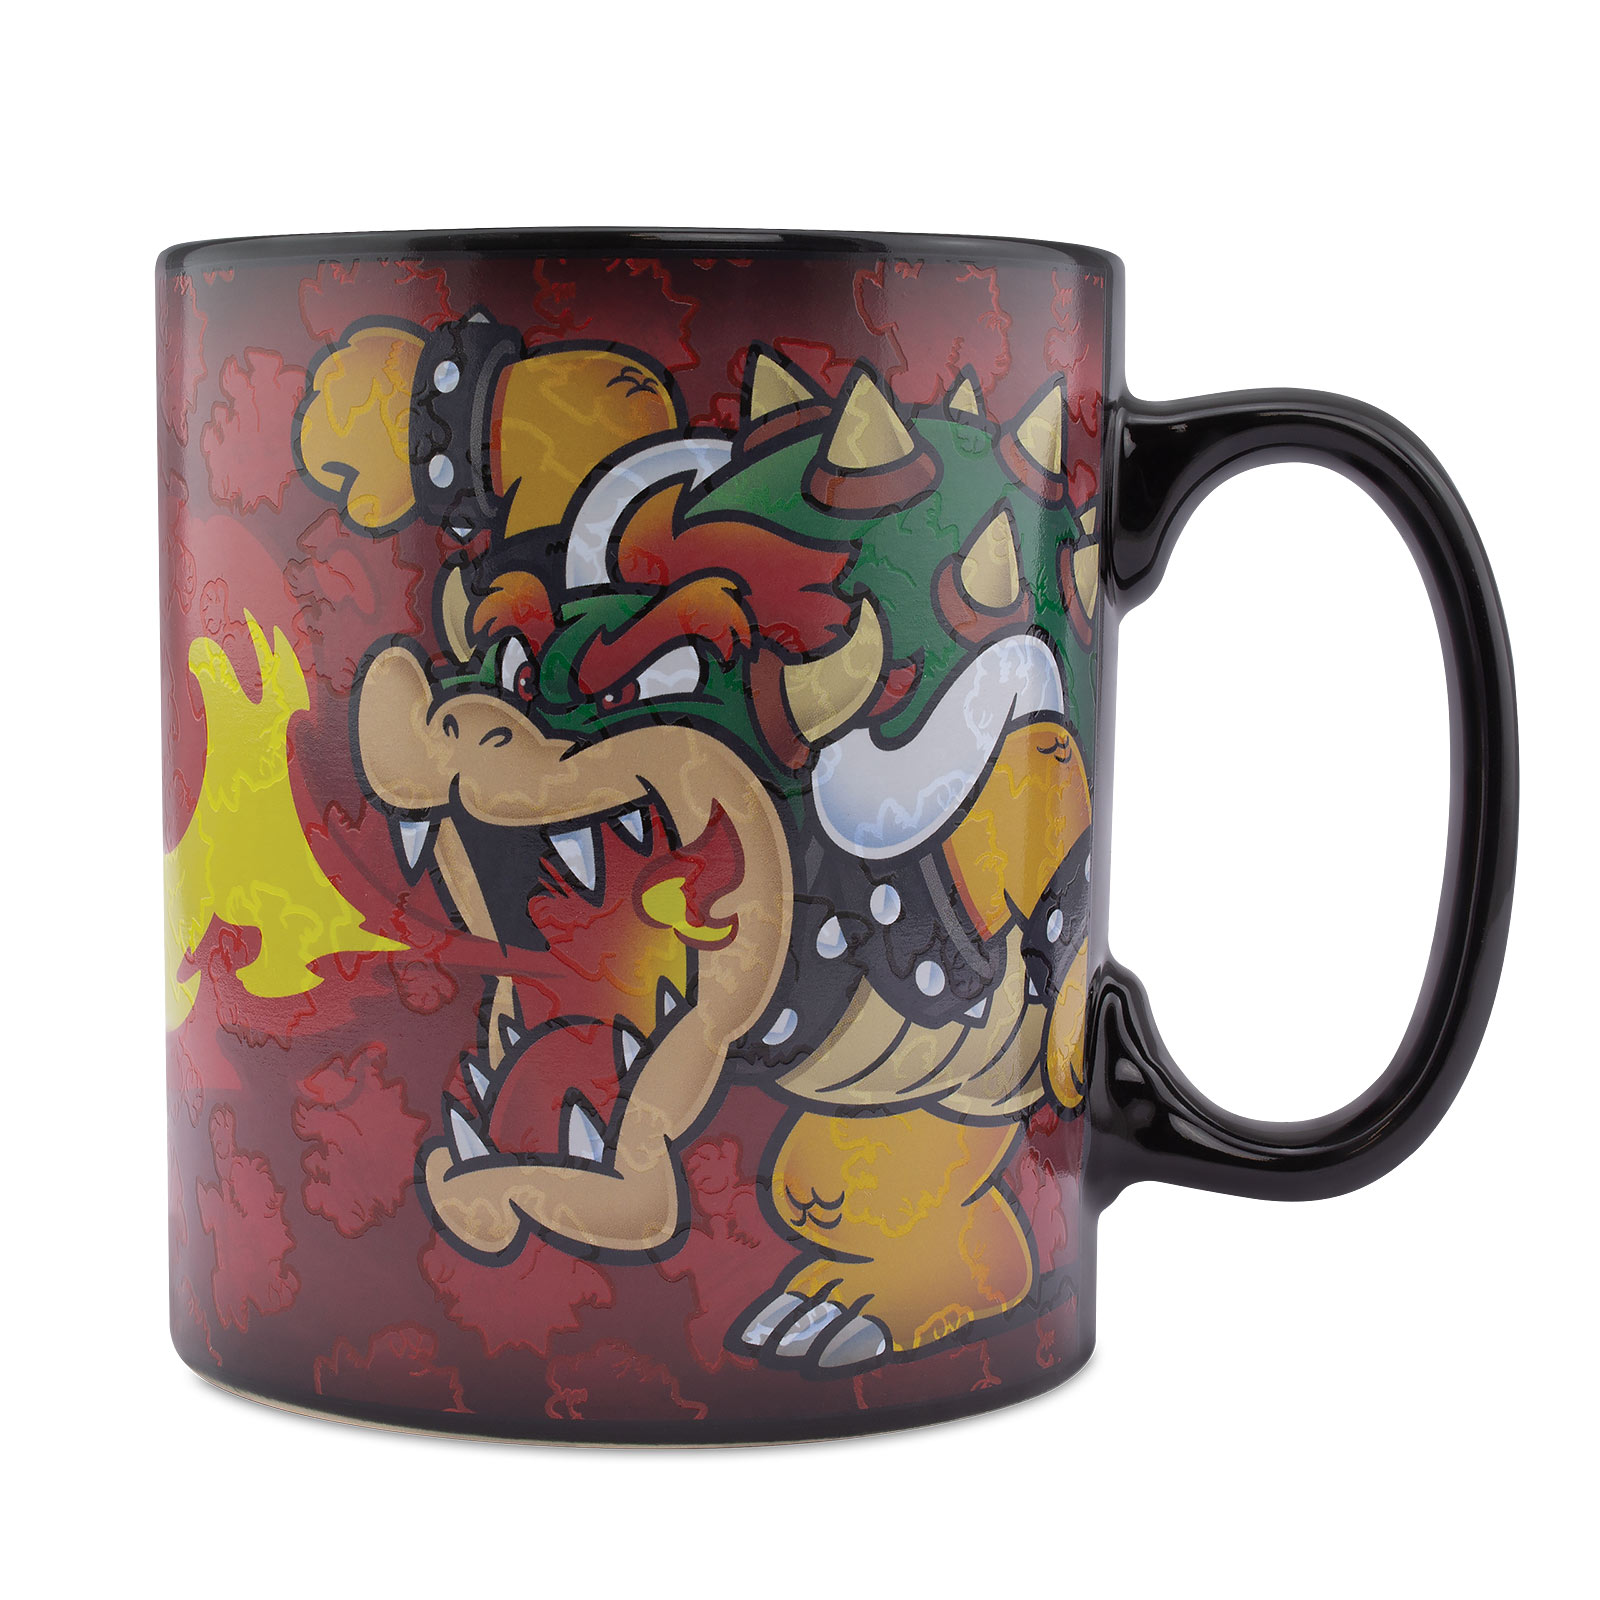 Super Mario - Bowser Thermoeffect Cup